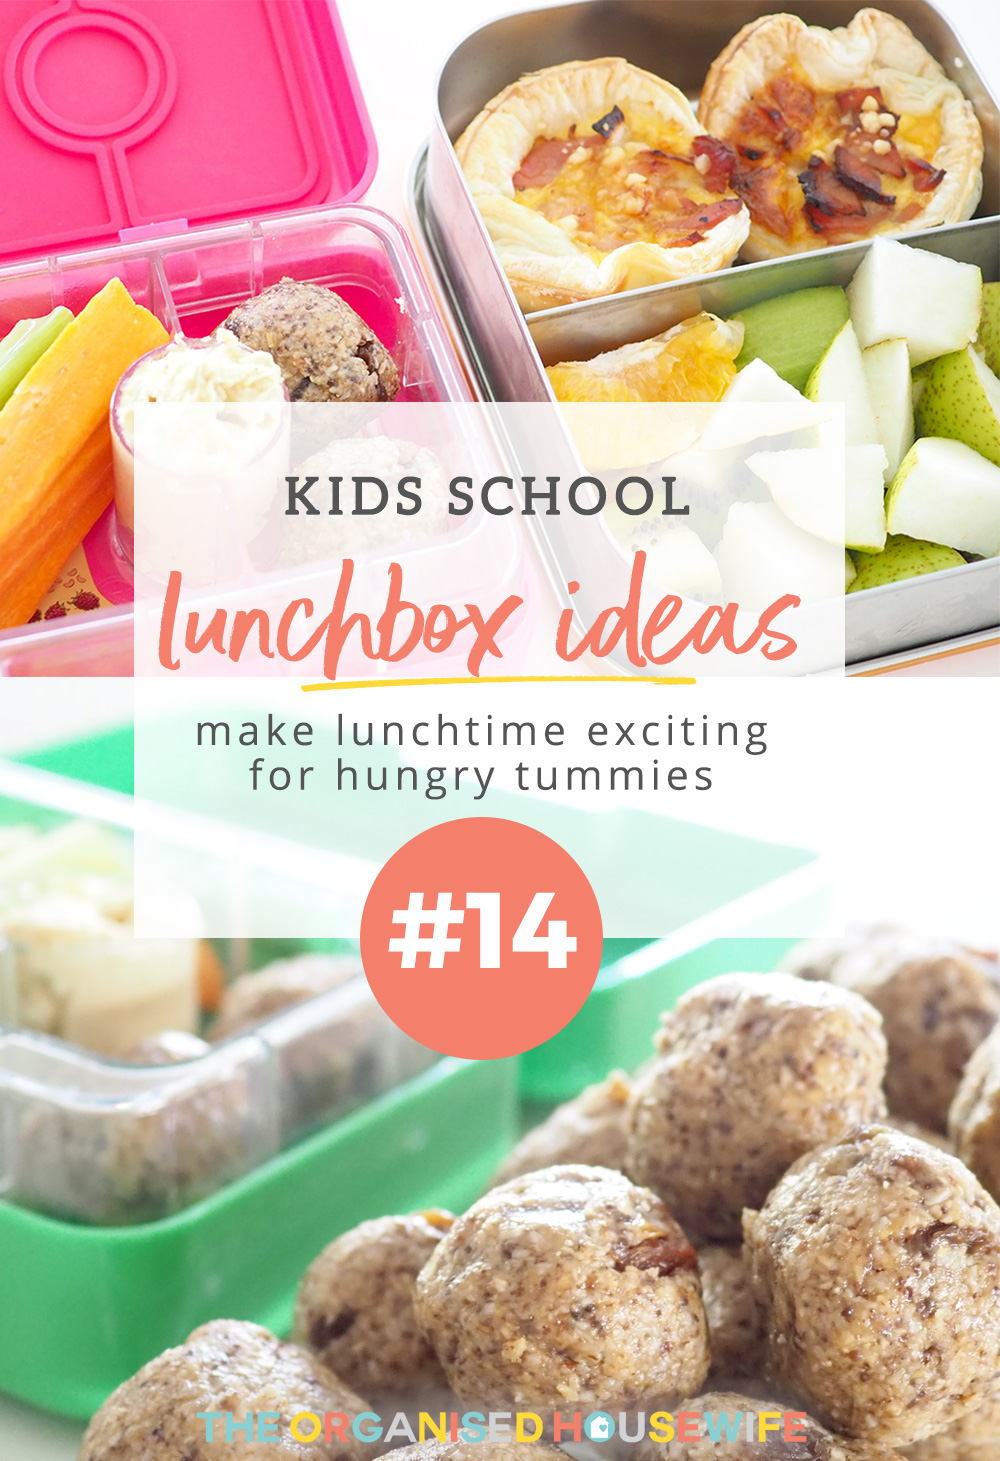 Kids Lunch box Ideas #14 - The Organised Housewife